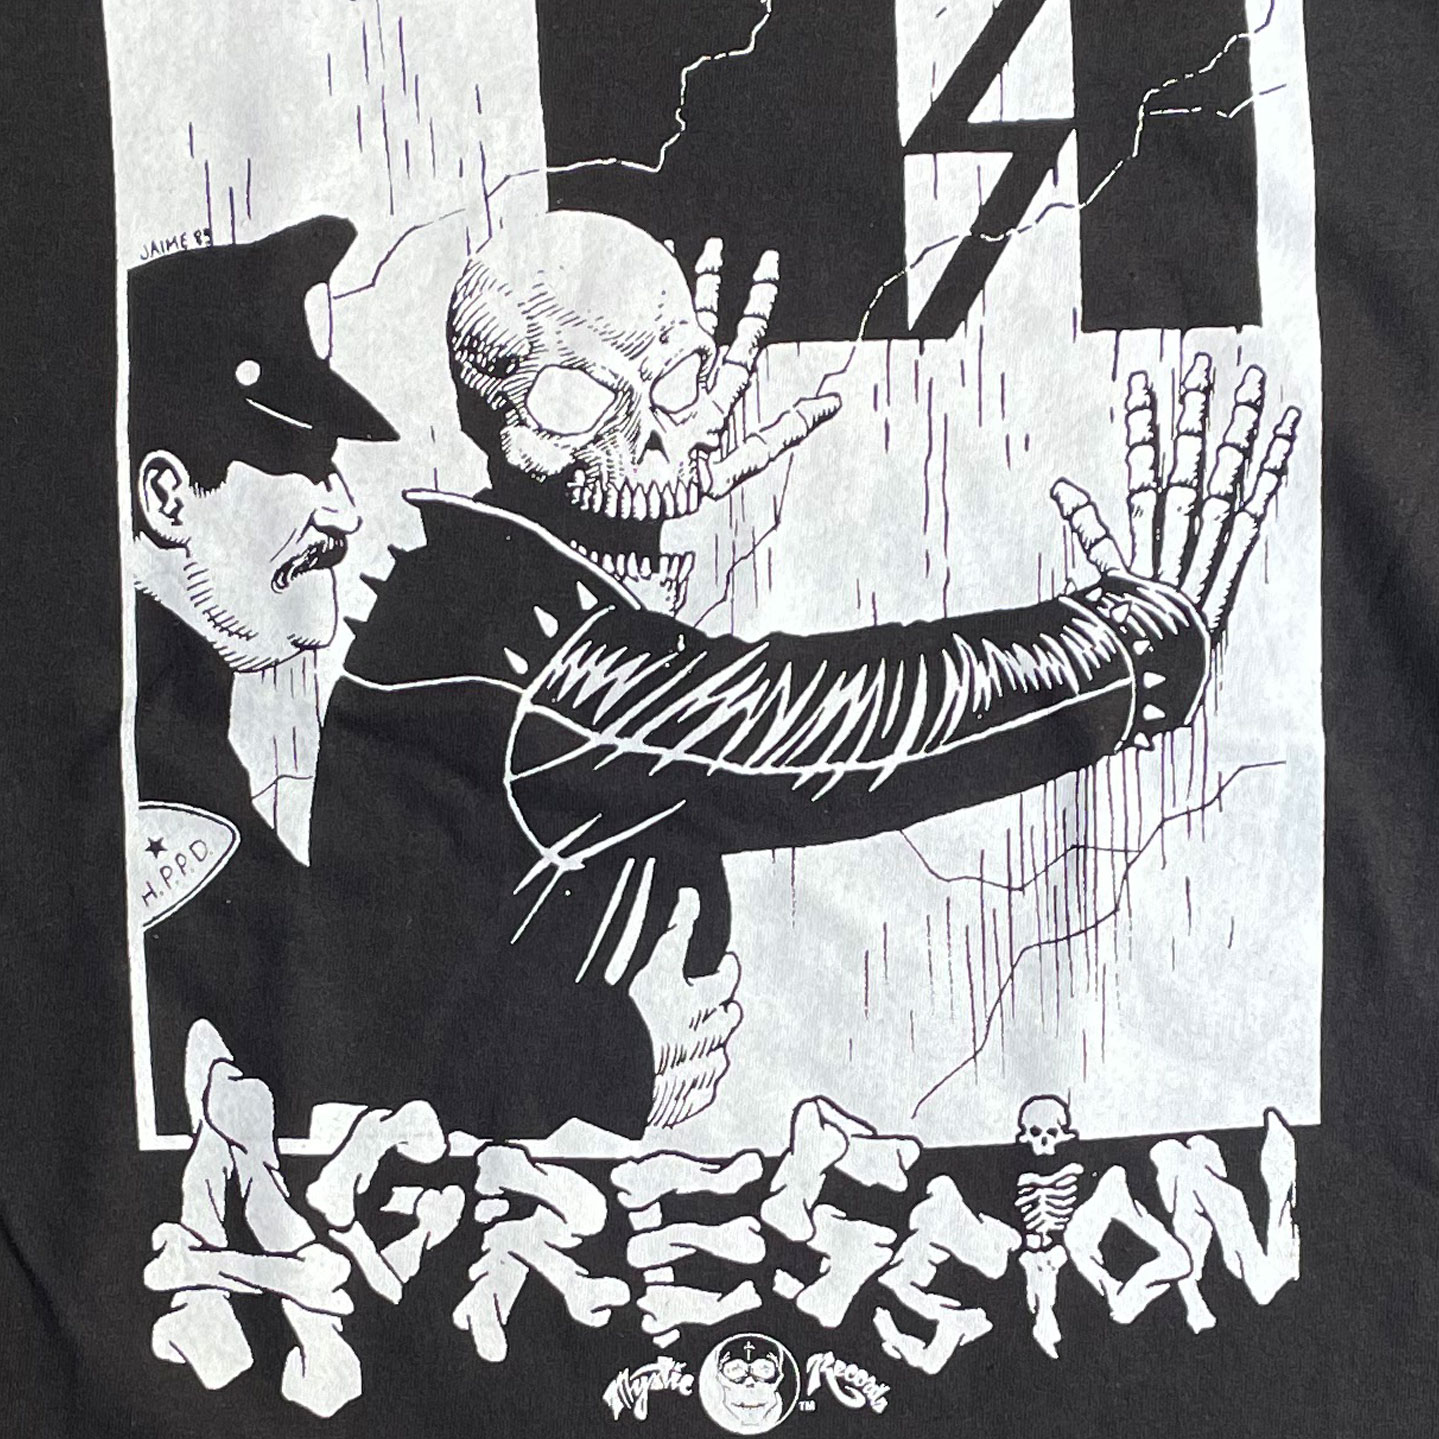 AGRESSION Tシャツ Don't Be Mistaken